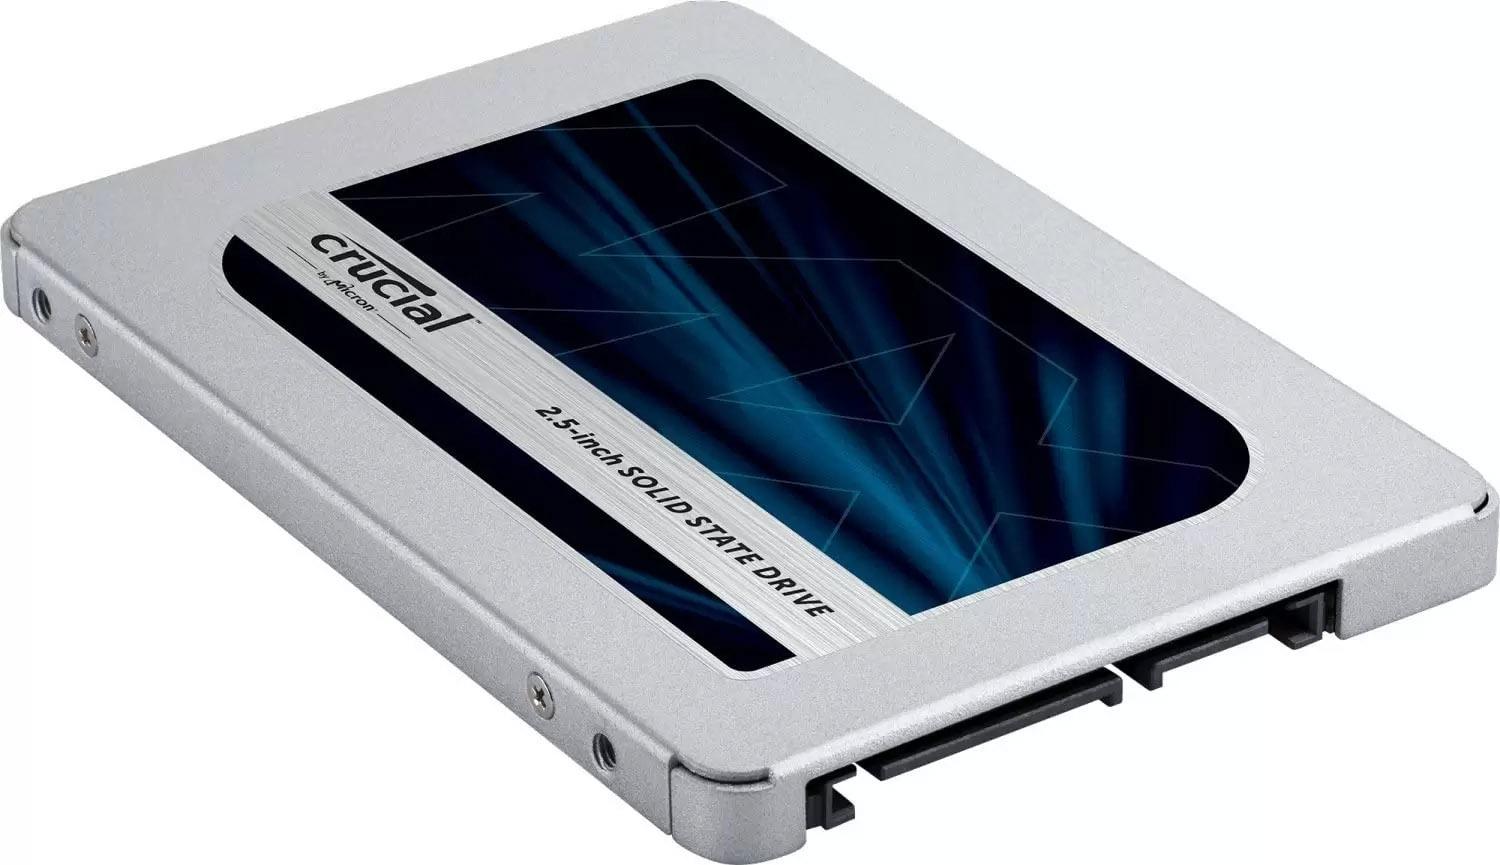 Crucial 500GB MX500 3D SSD Solid State Drive for $57.99 Shipped